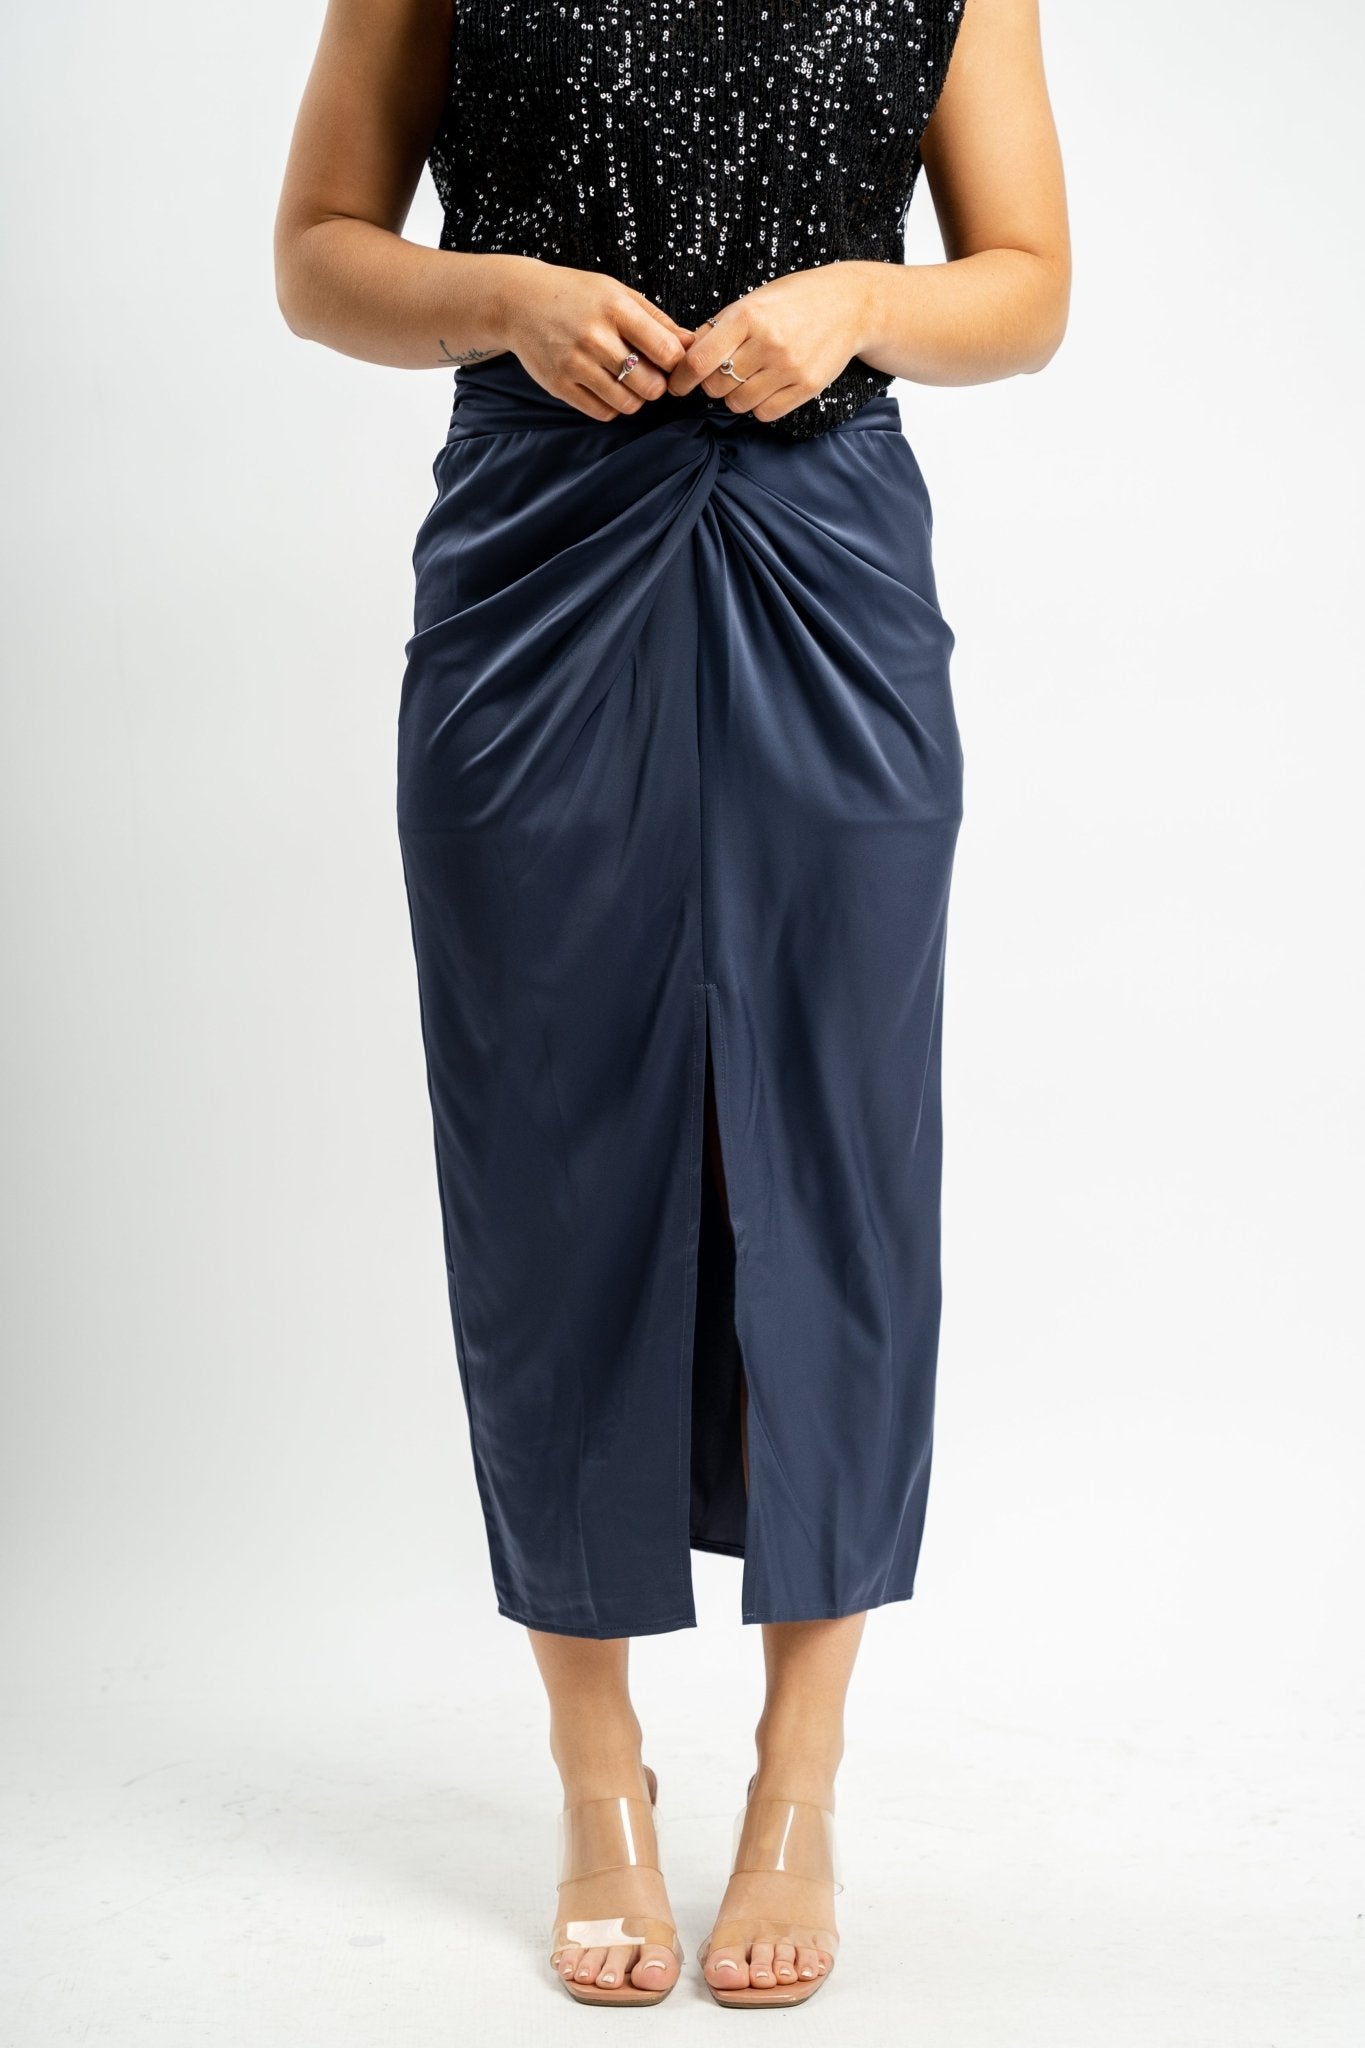 Twist waist midi skirt navy - Affordable New Year's Eve Party Outfits at Lush Fashion Lounge Boutique in Oklahoma City